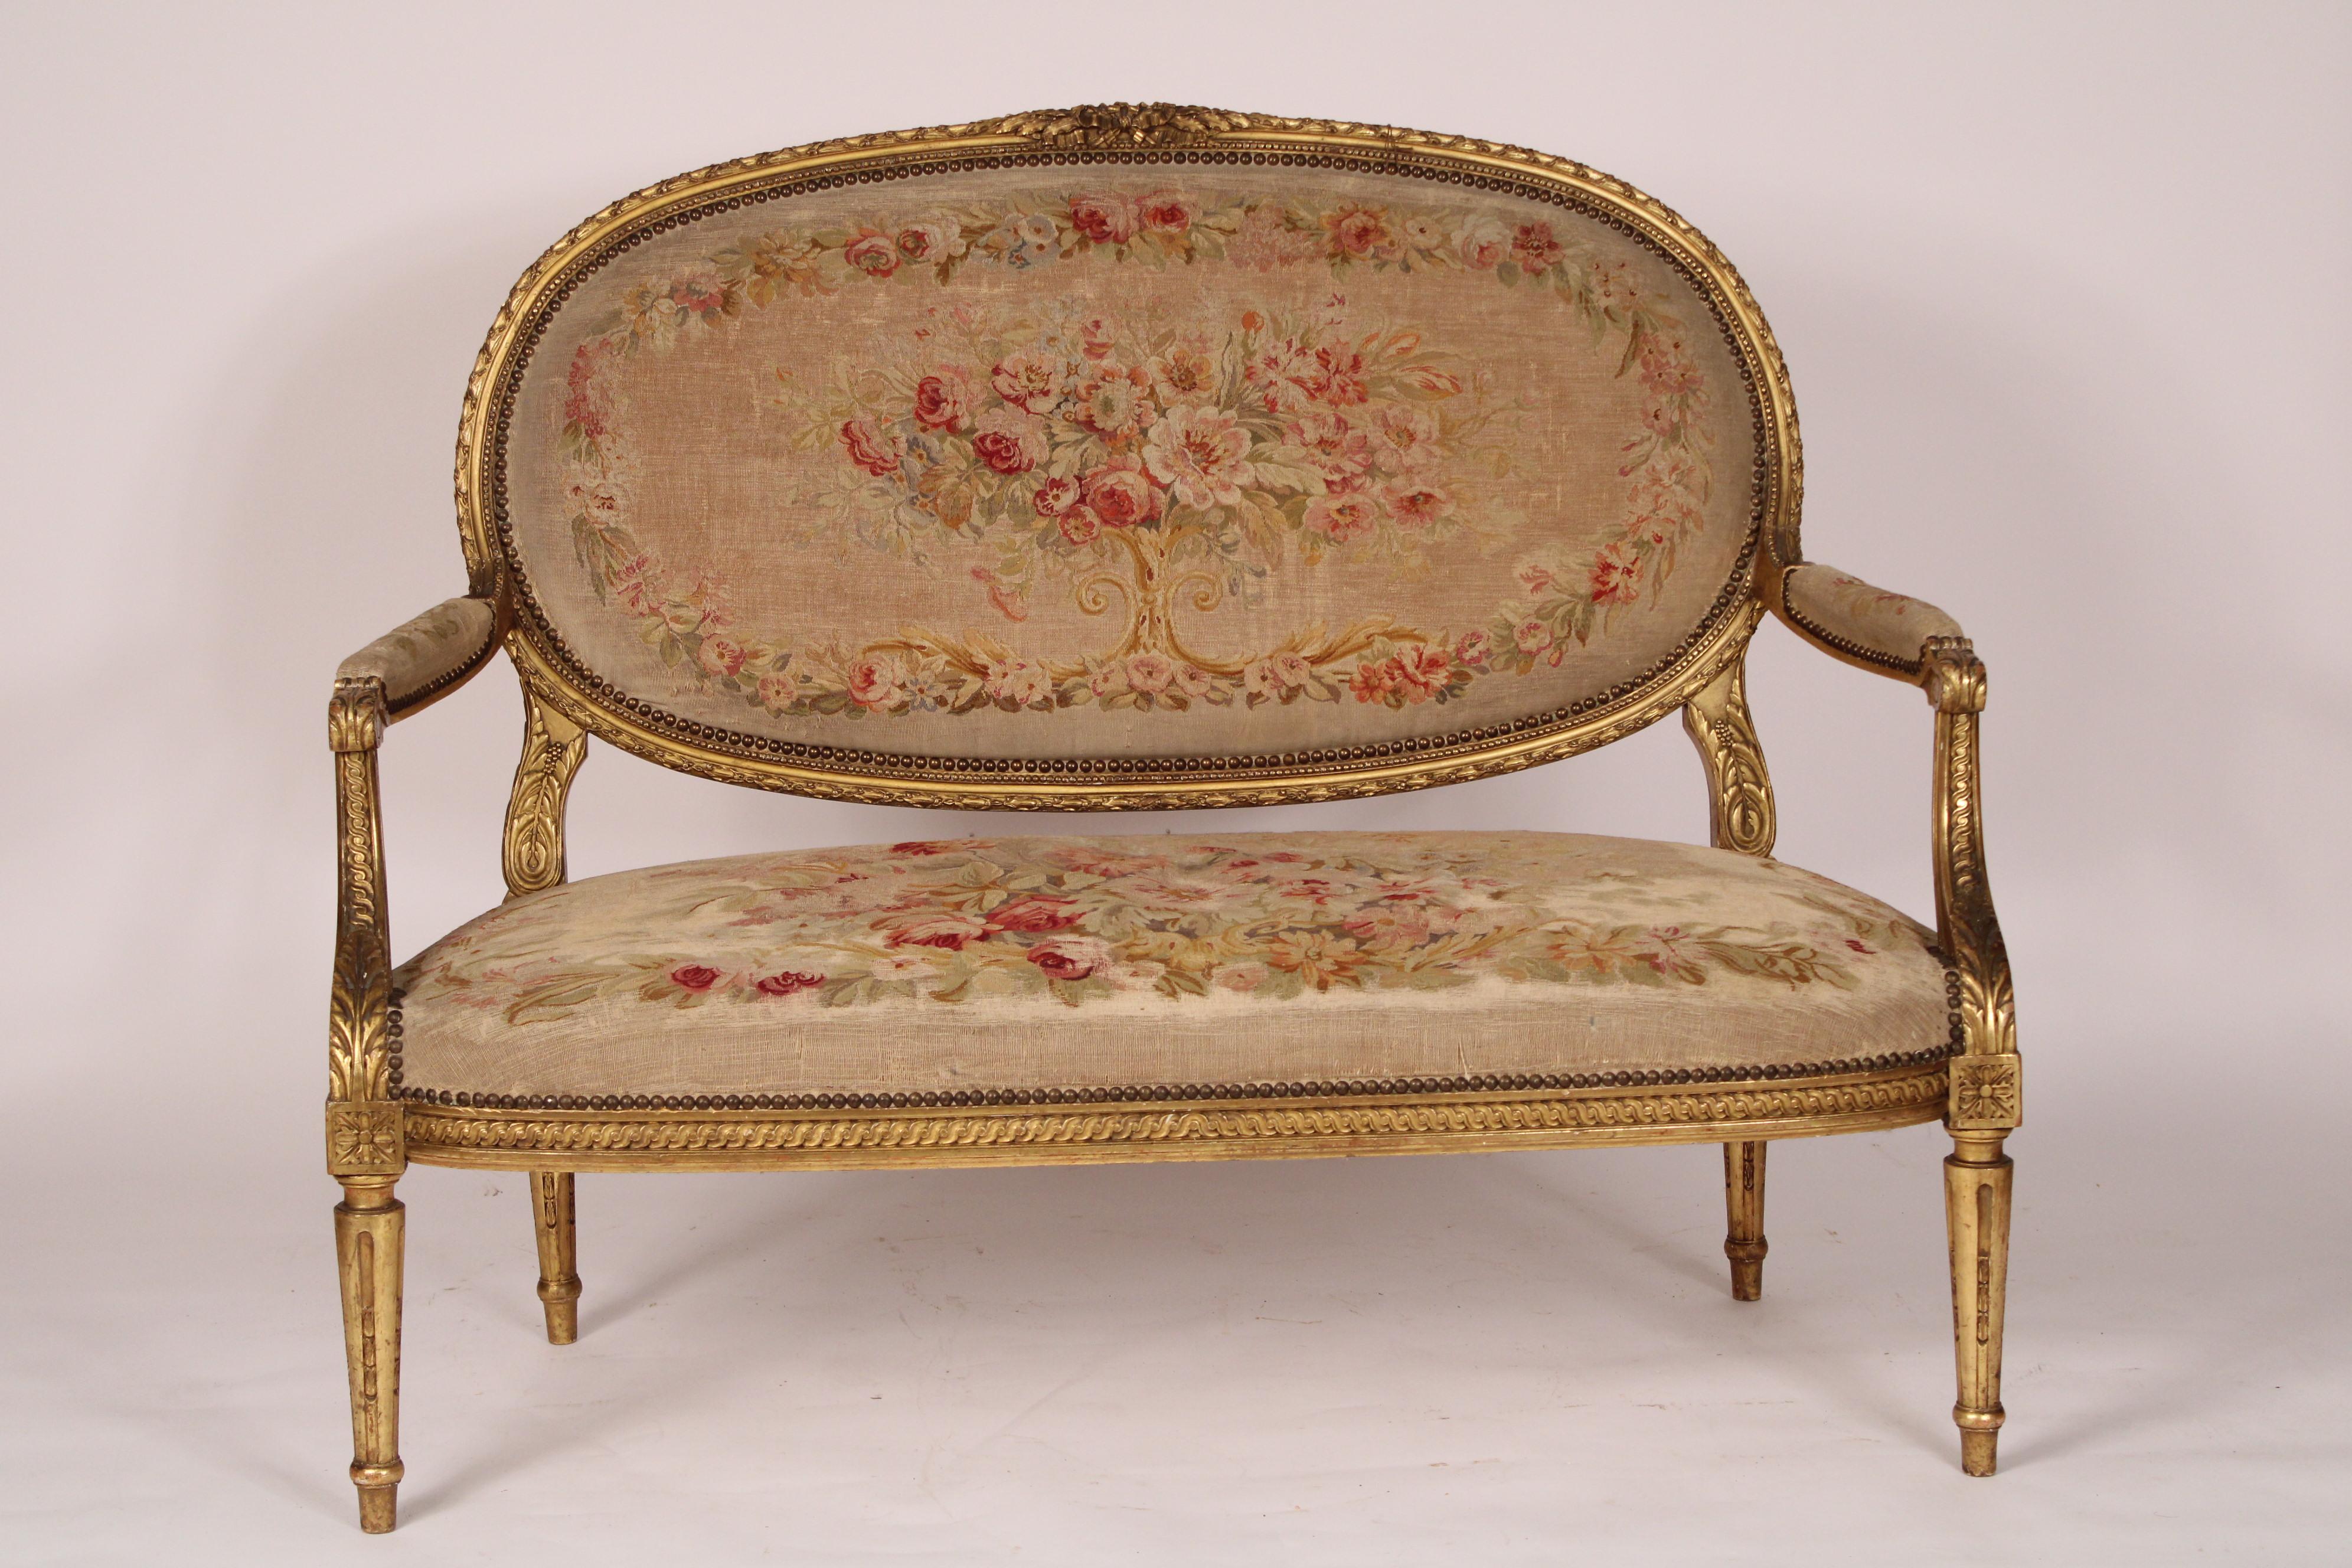 Antique Louis XVI style gilt wood settee with Aubusson style upholstery, circa 1900. The back with Aubusson style upholsterery with a foliate carved gilt wood frame, an Aubusson upholstered seat, gilt wood down swept arms with acanthus and guilloche